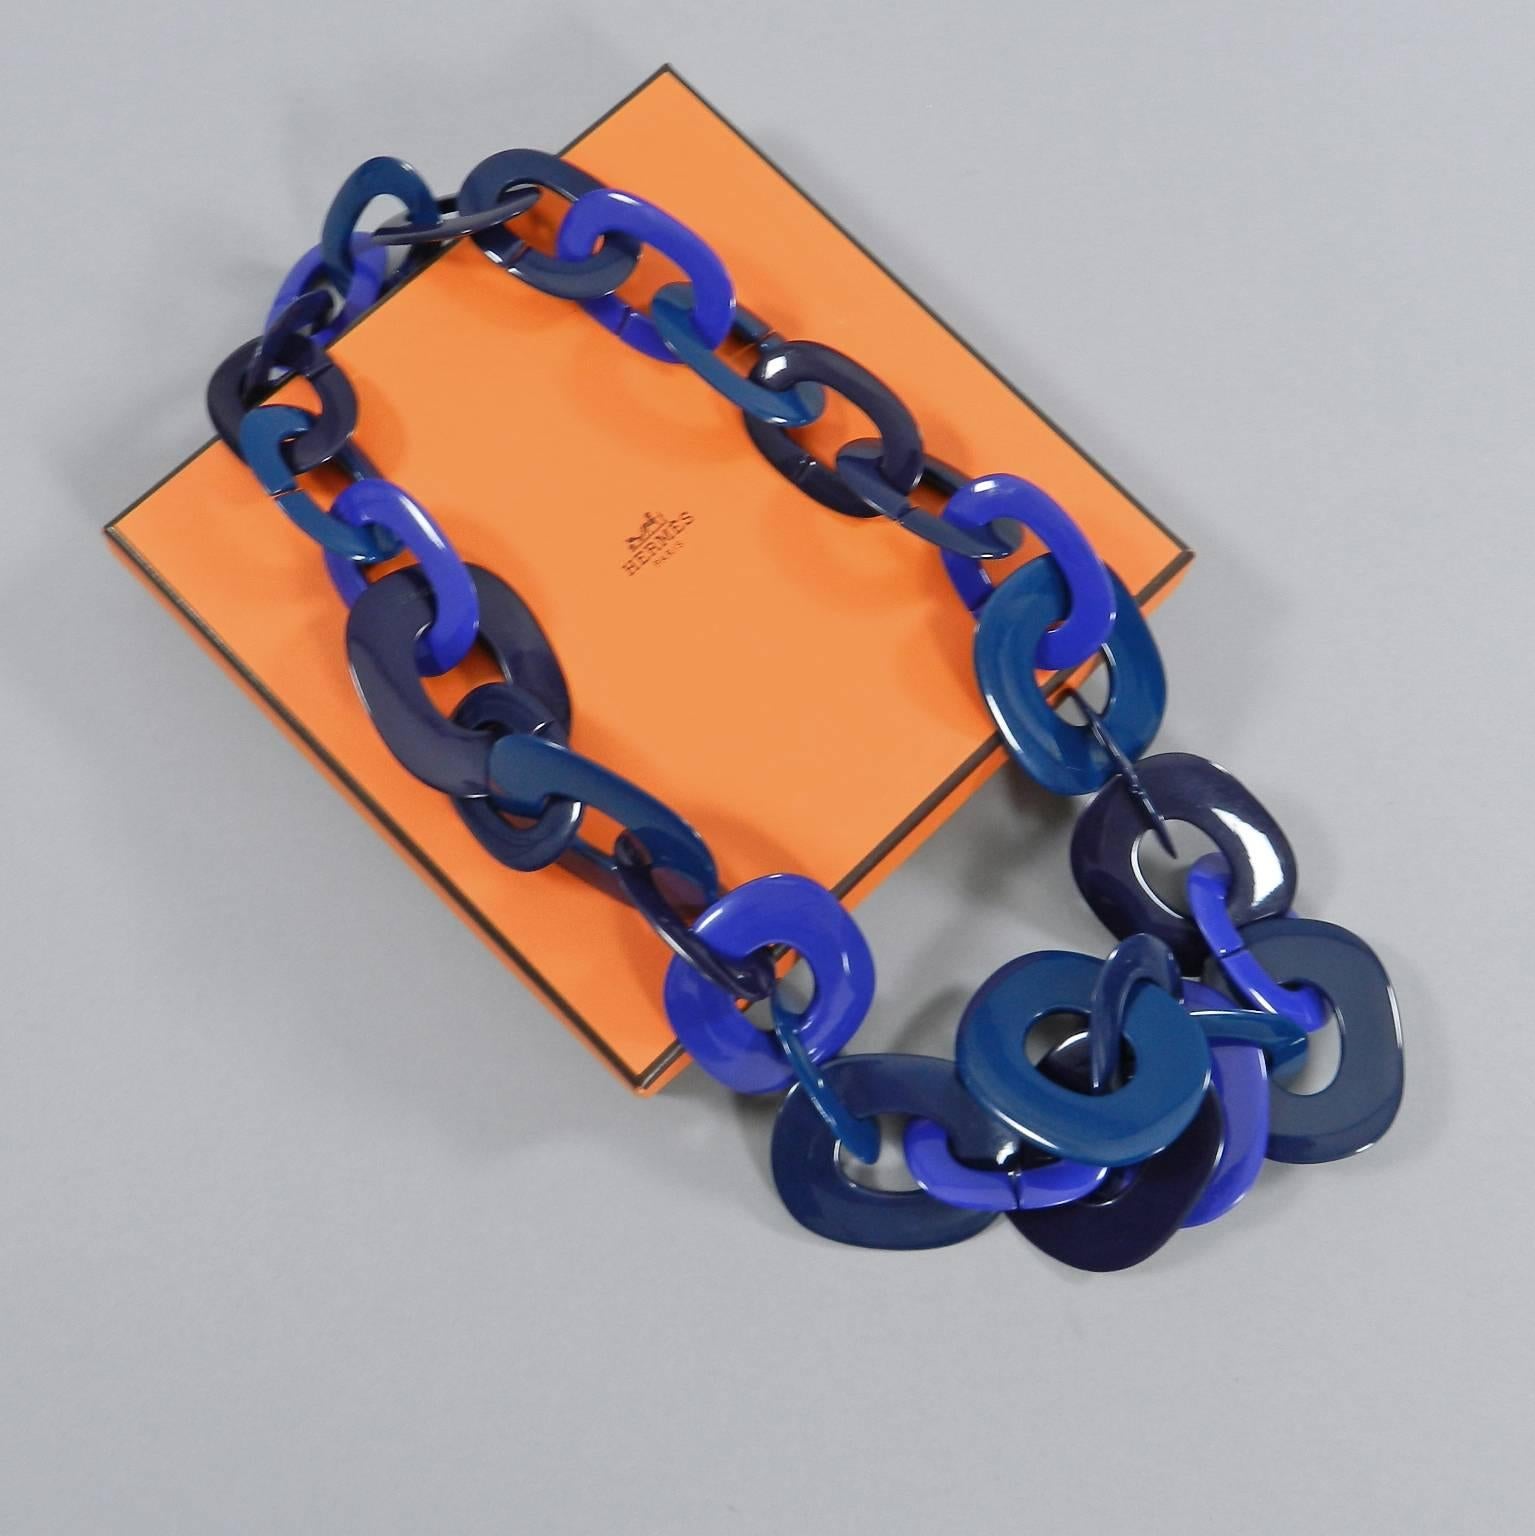 Hermes Isidore link necklace. Three shades of blue lacquer with pouch and box.  Interior circumference measures 26